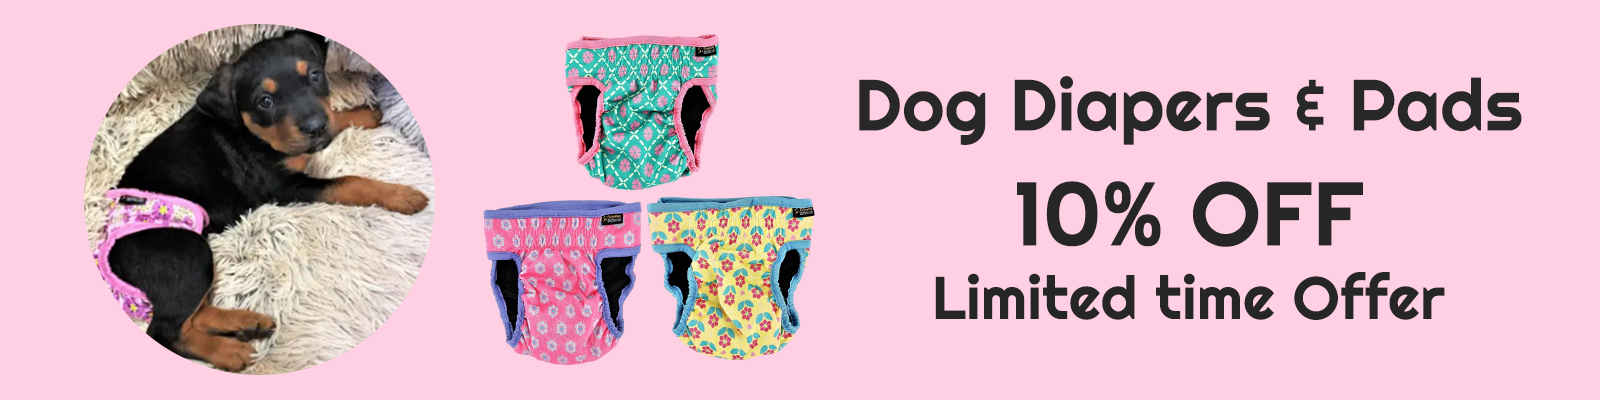 Dog Diapers & Pads